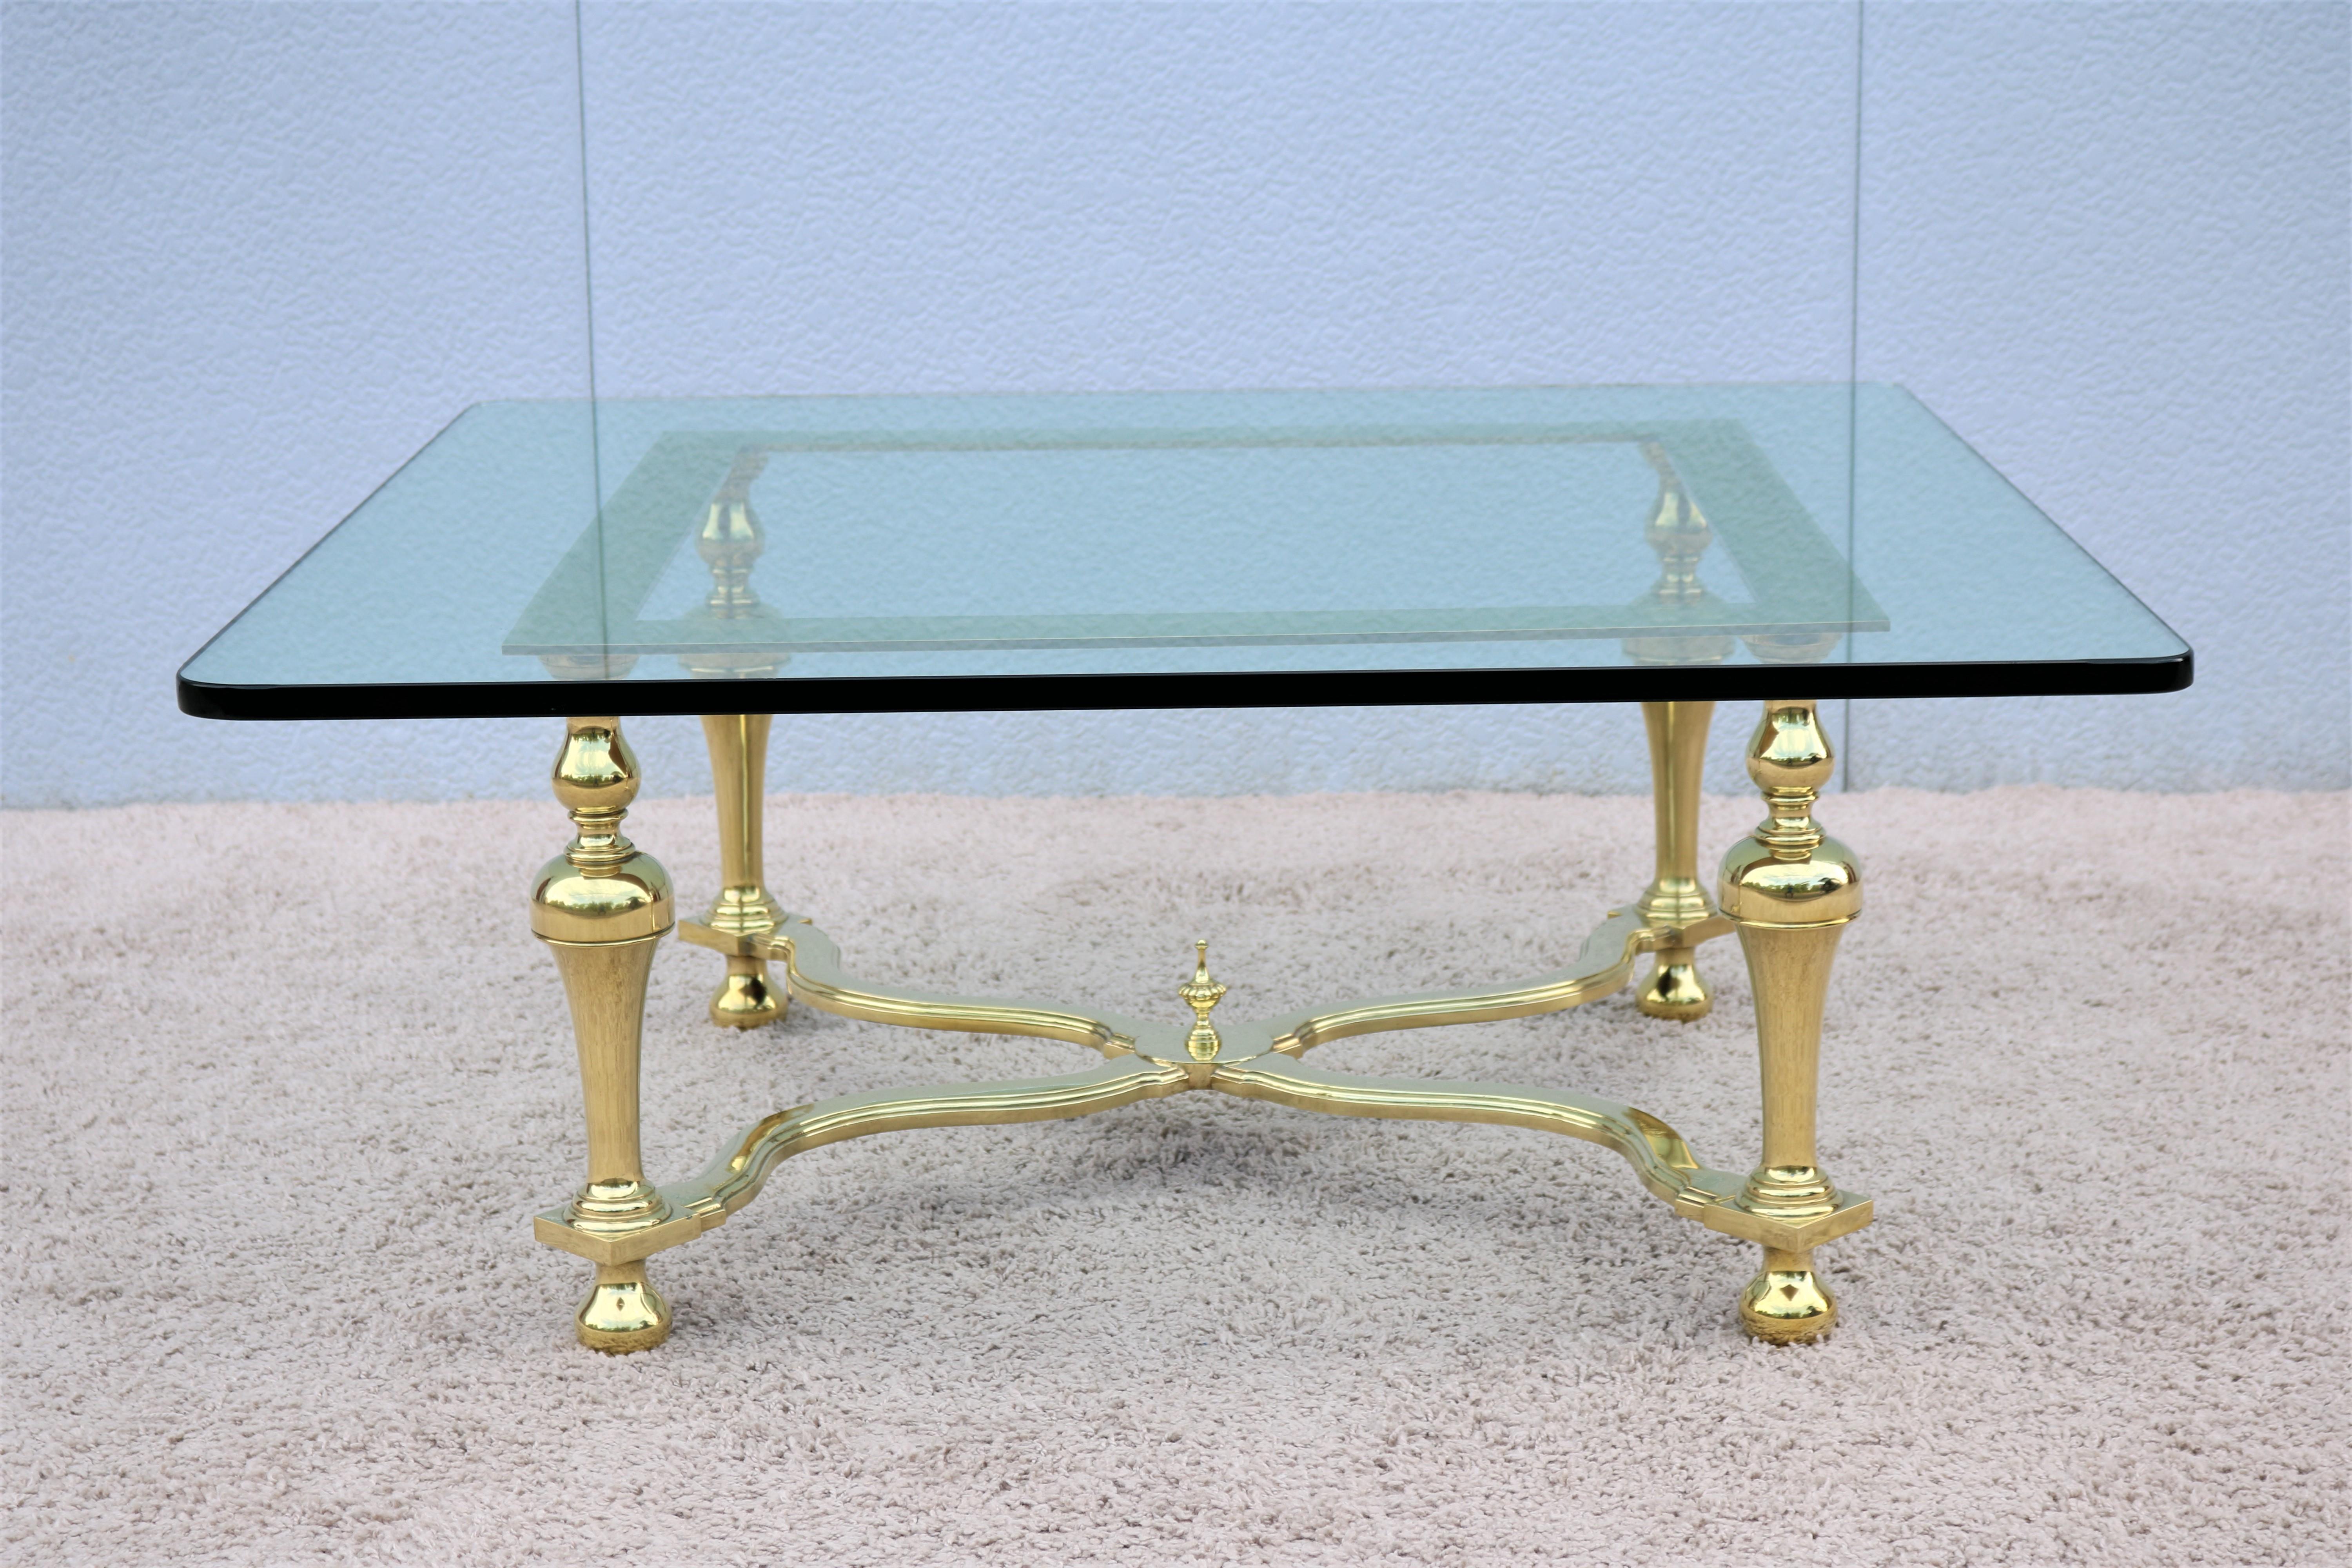 Stunning and elegant Maison Jansen style Hollywood Regency brass and glass square coffee table, features brass trumpet shaped legs and cross stretcher with a center ball finial, beautiful brass details make this table attractive center piece for